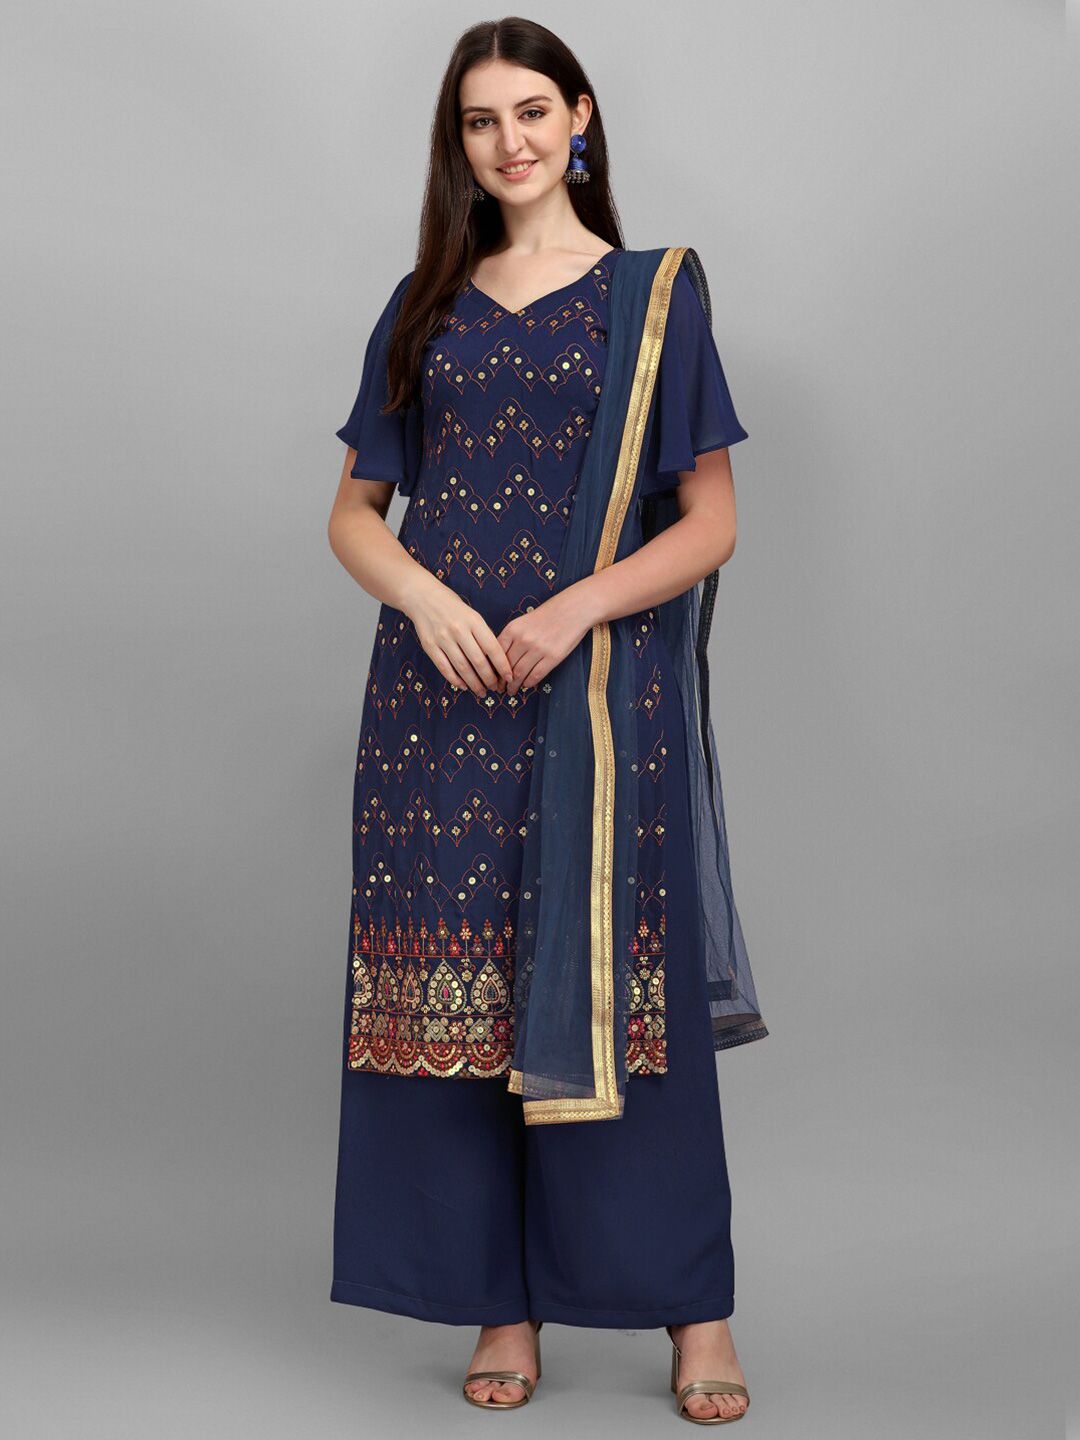 JATRIQQ Blue & Gold-Toned Embroidered Semi-Stitched Dress Material Price in India